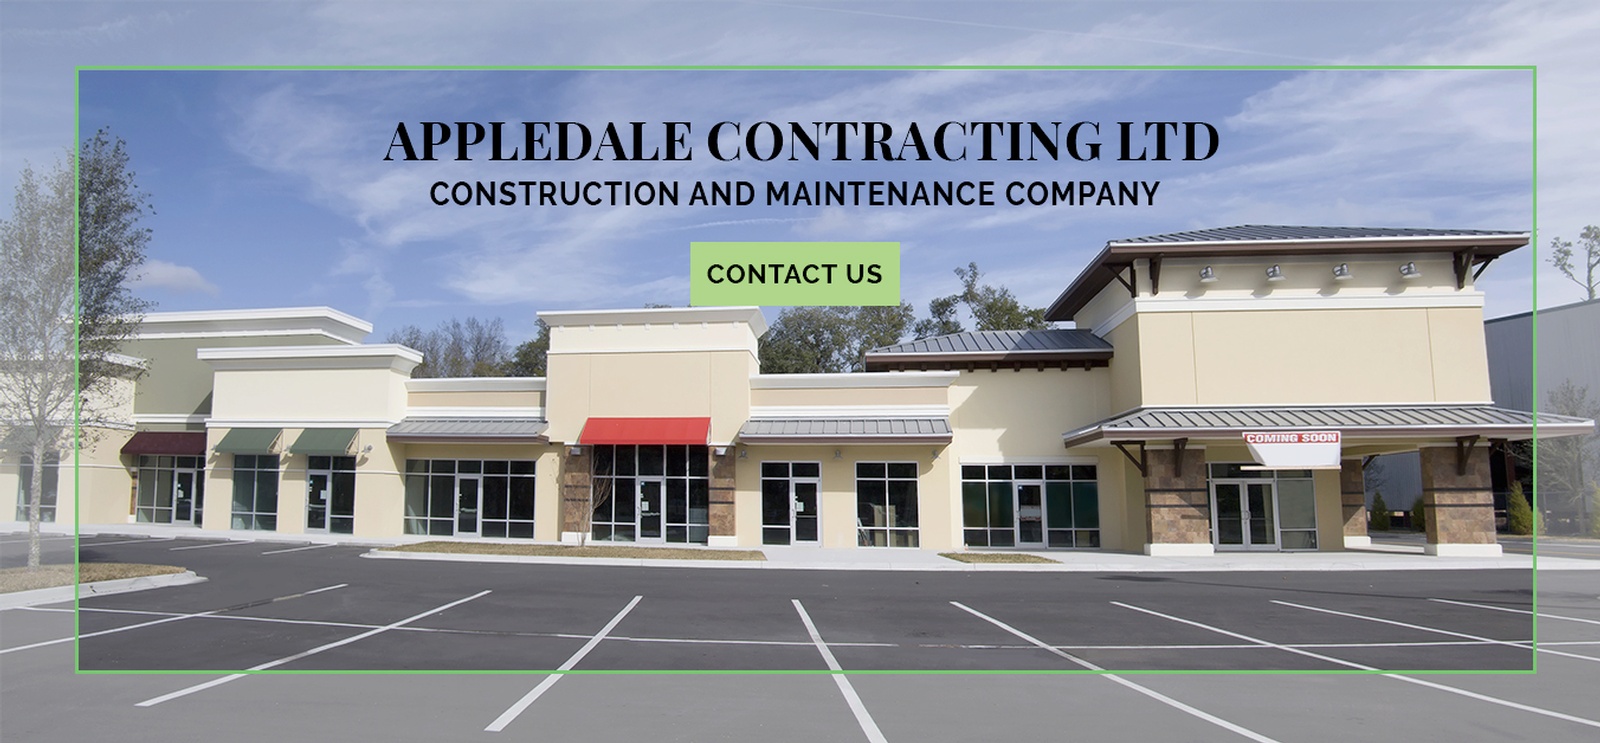 Appledale Contracting Ltd - Construction and Maintenance Company